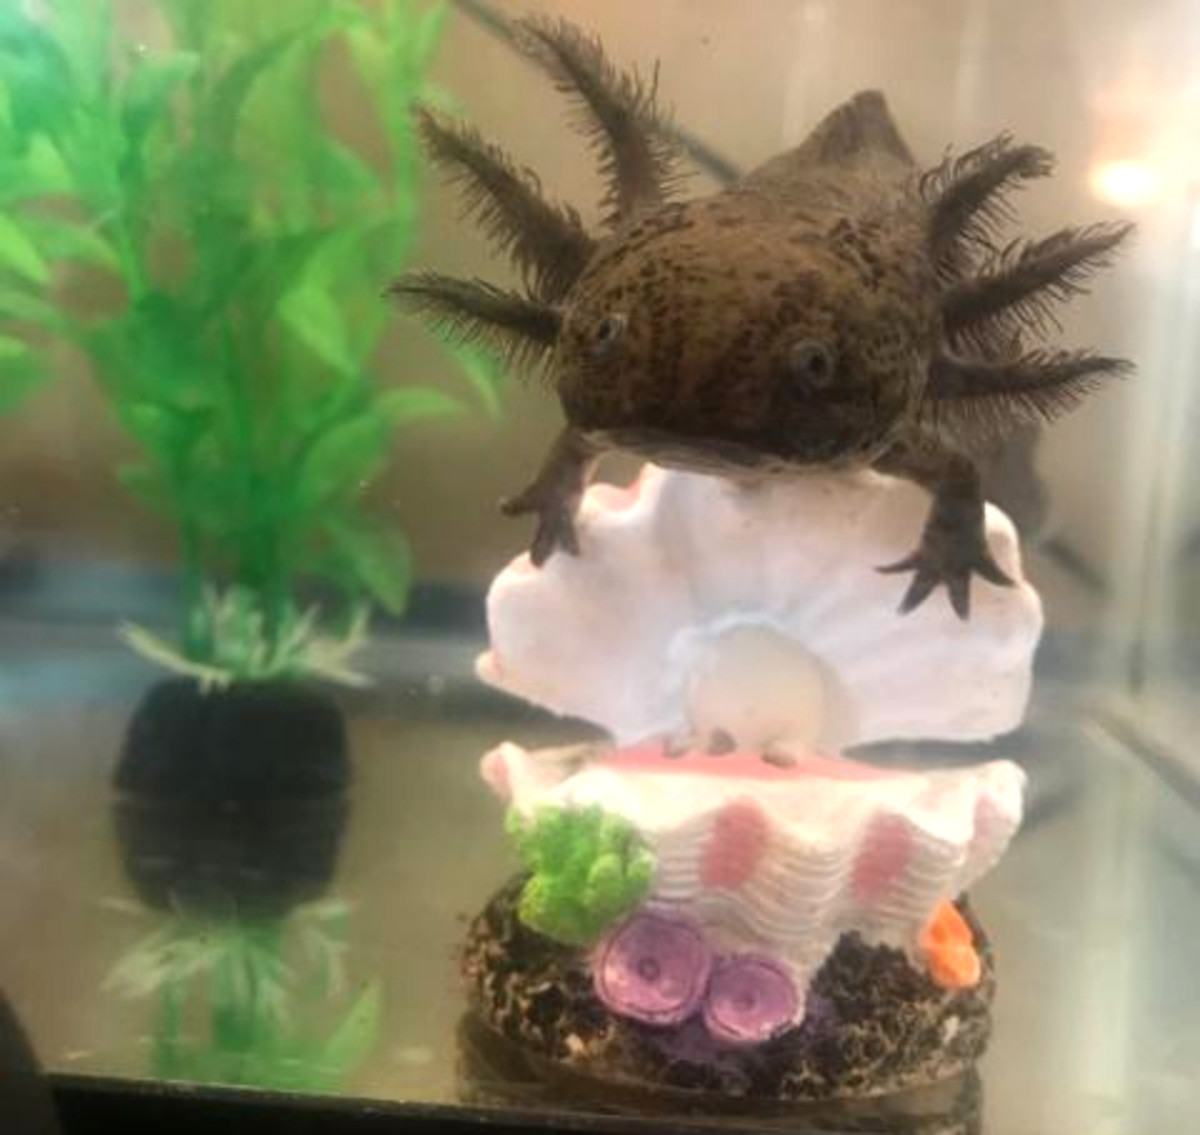 Those cute "floofs" are gills, but axolotl can also breathe with lungs.